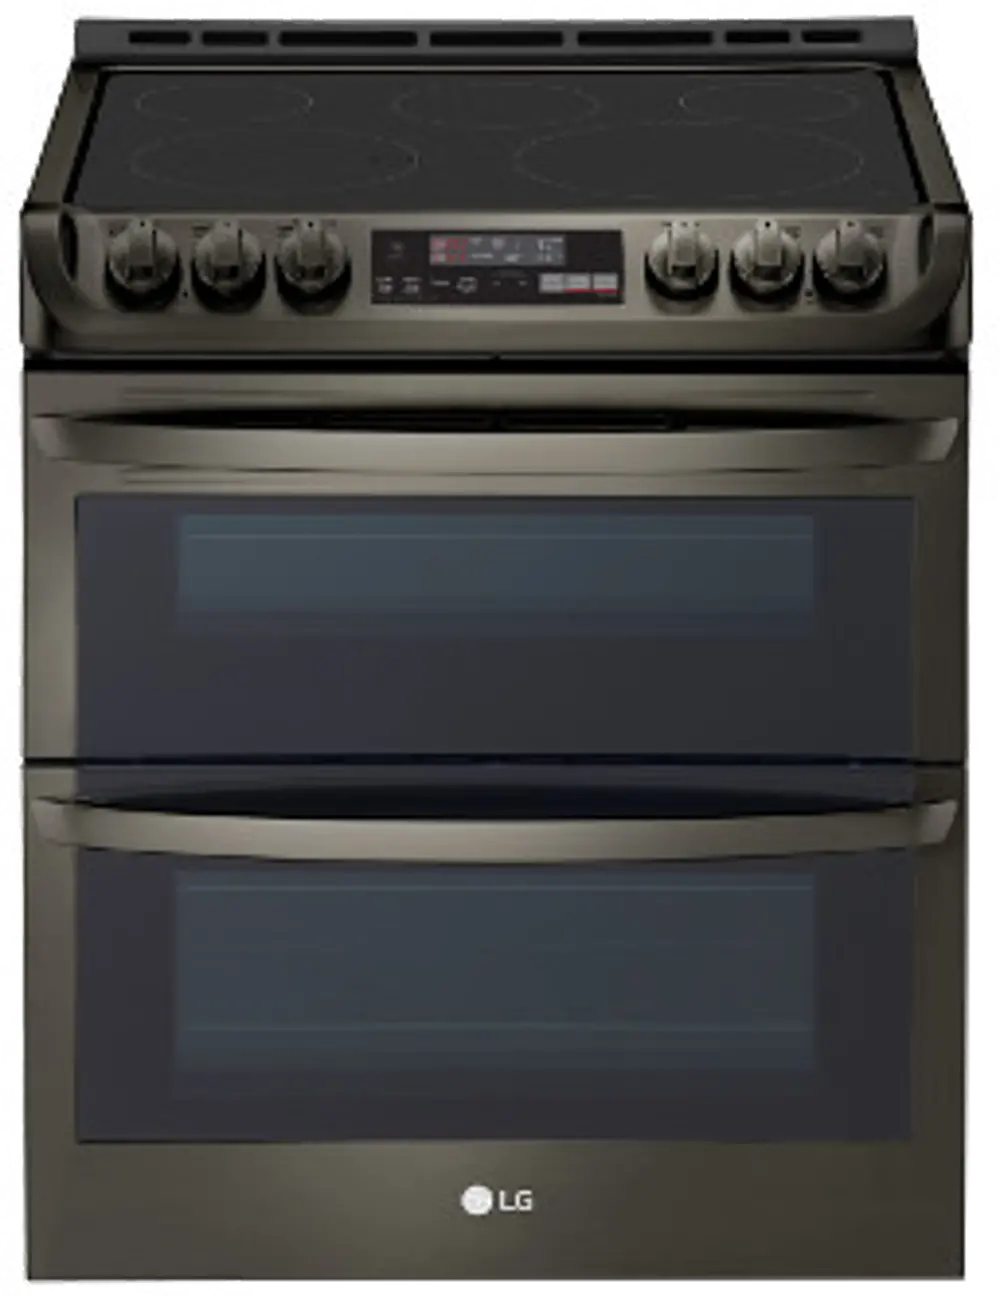 LTE4815BD LG 7.3 cu ft Double Oven Electric Range - Black Stainless Steel-1